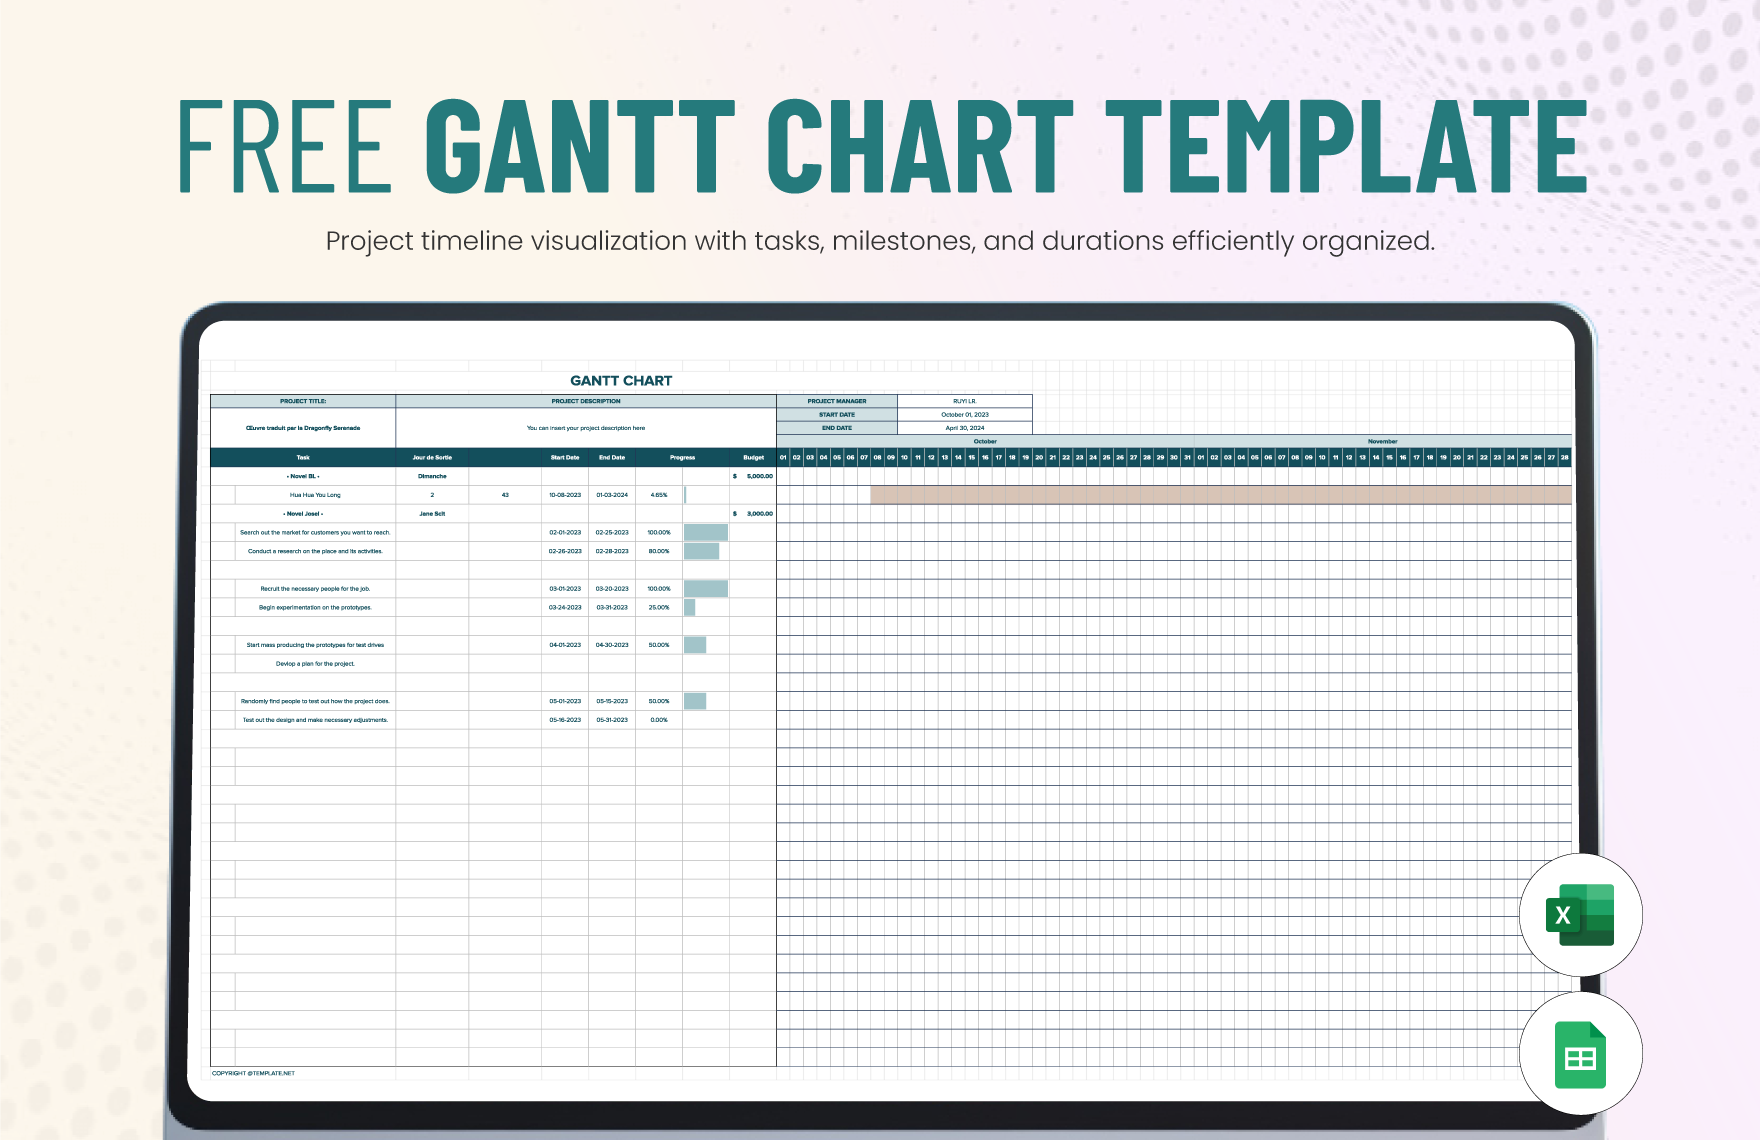 Free Gantt Chart Template in Excel, Google Sheets